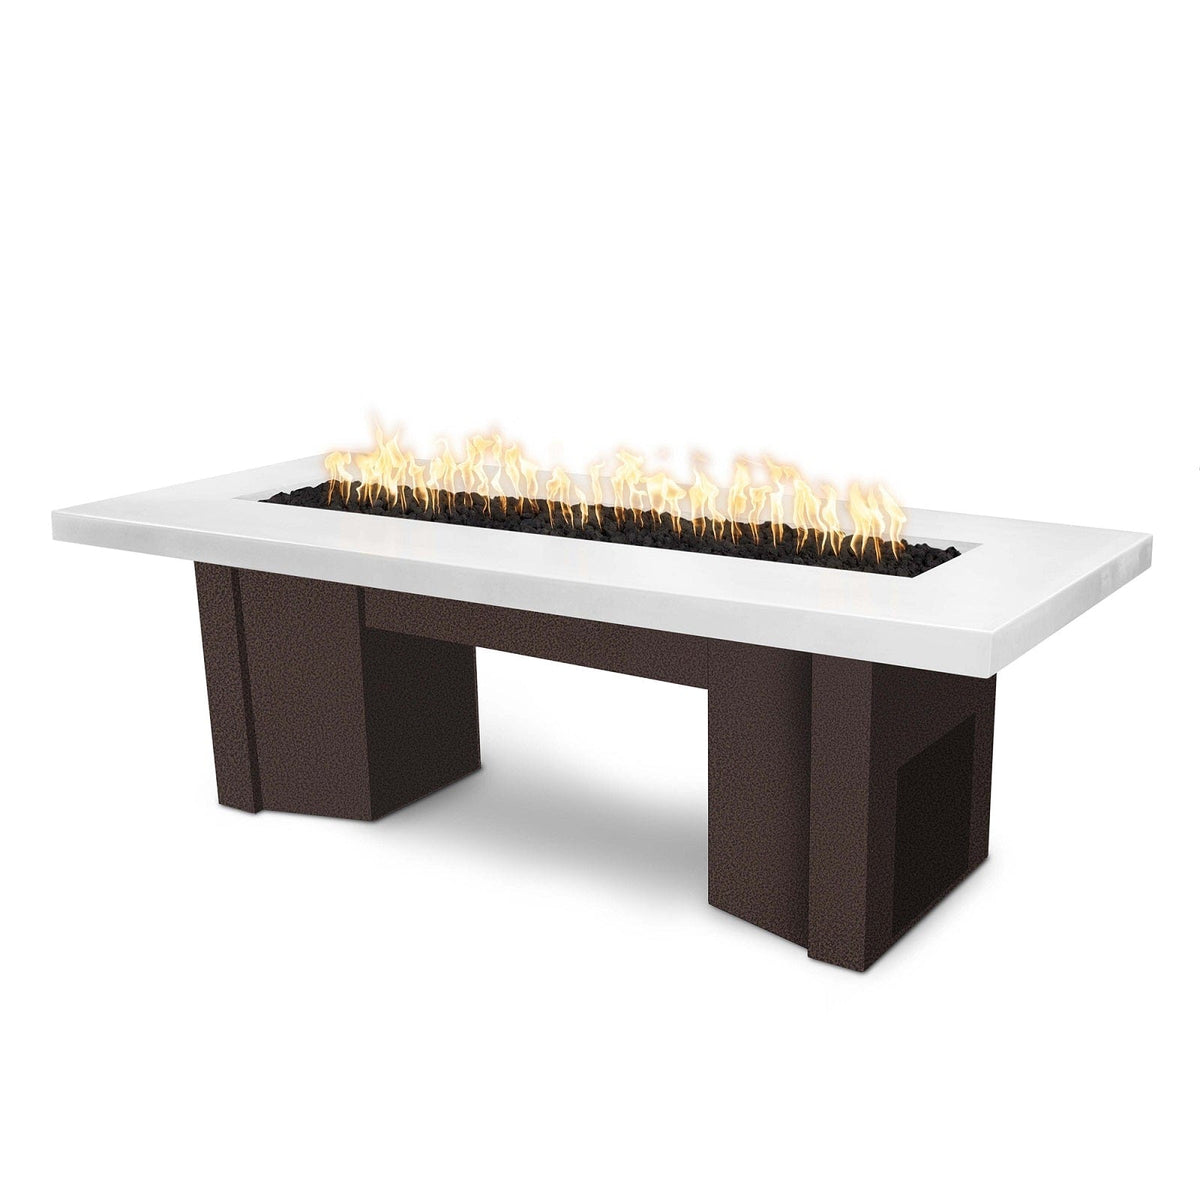 The Outdoor Plus Fire Features Limestone (-LIM) / Copper Vein Powder Coated Steel (-CPV) The Outdoor Plus 60&quot; Alameda Fire Table Smooth Concrete in Natural Gas - Match Lit / OPT-ALMGFRC60-NG